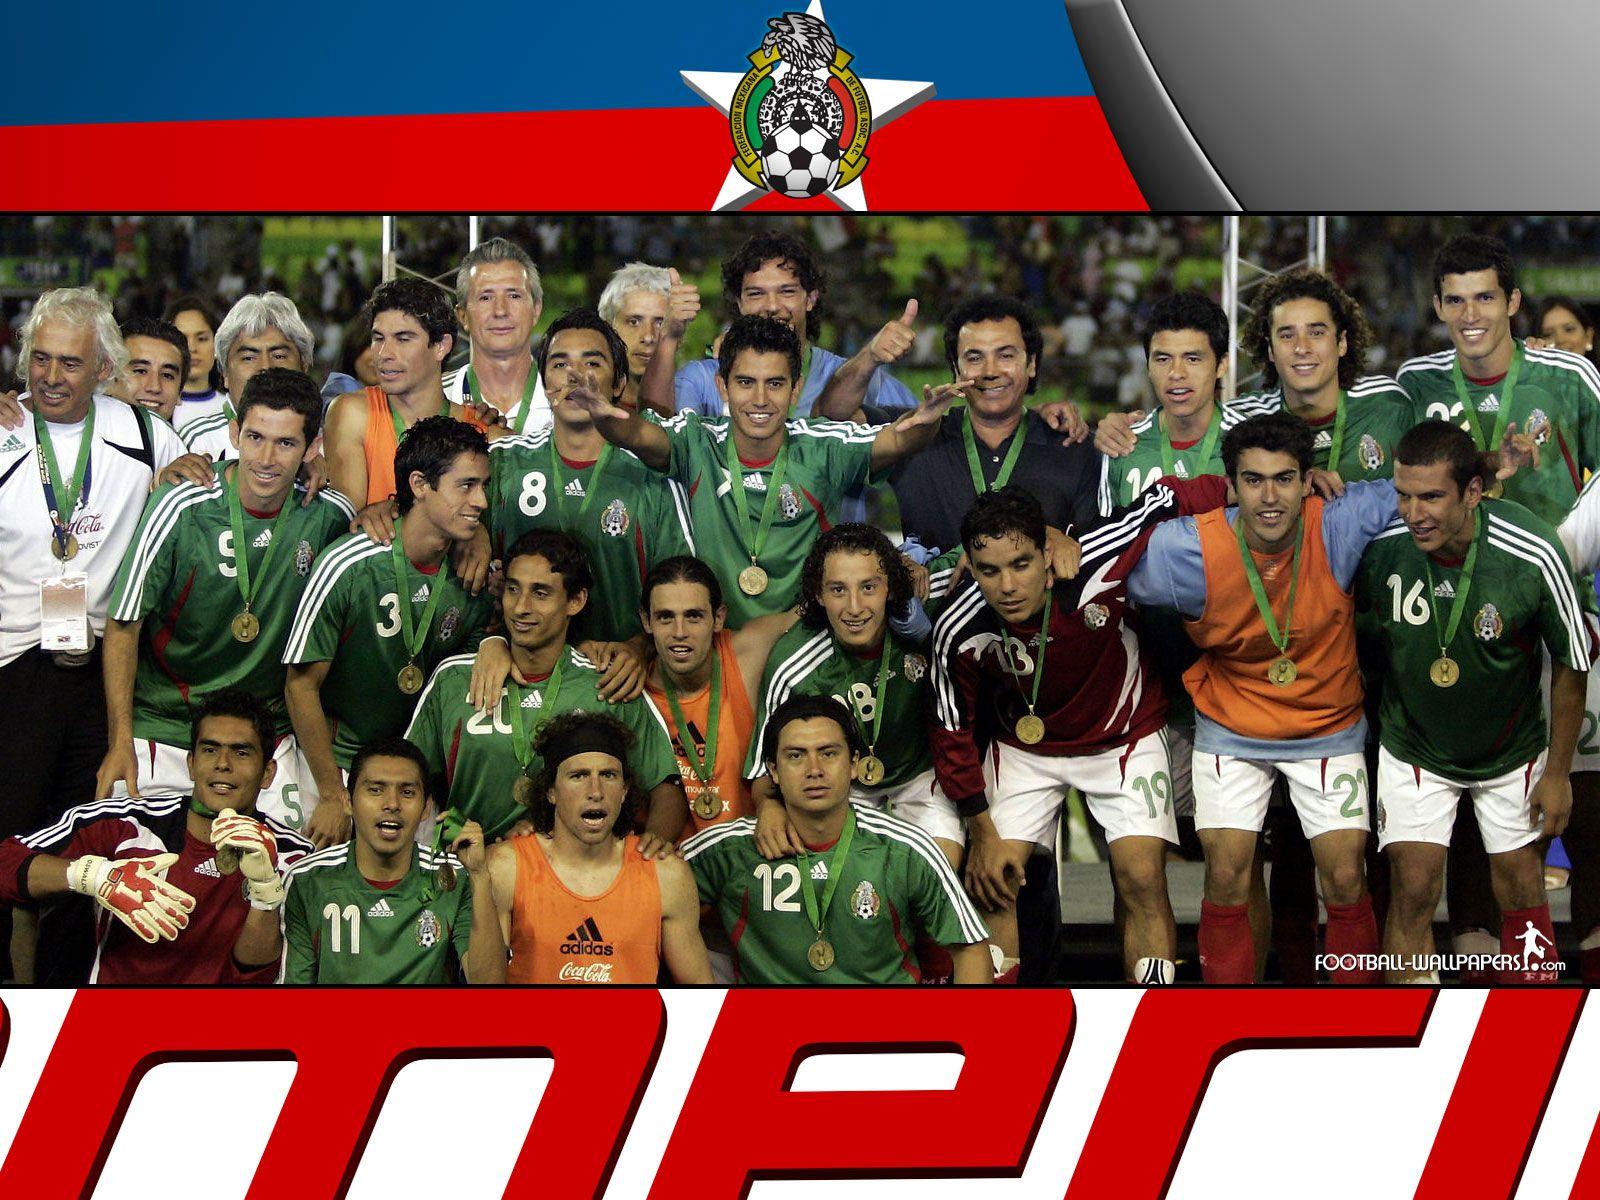 Mexico national football team wallpaper and Theme